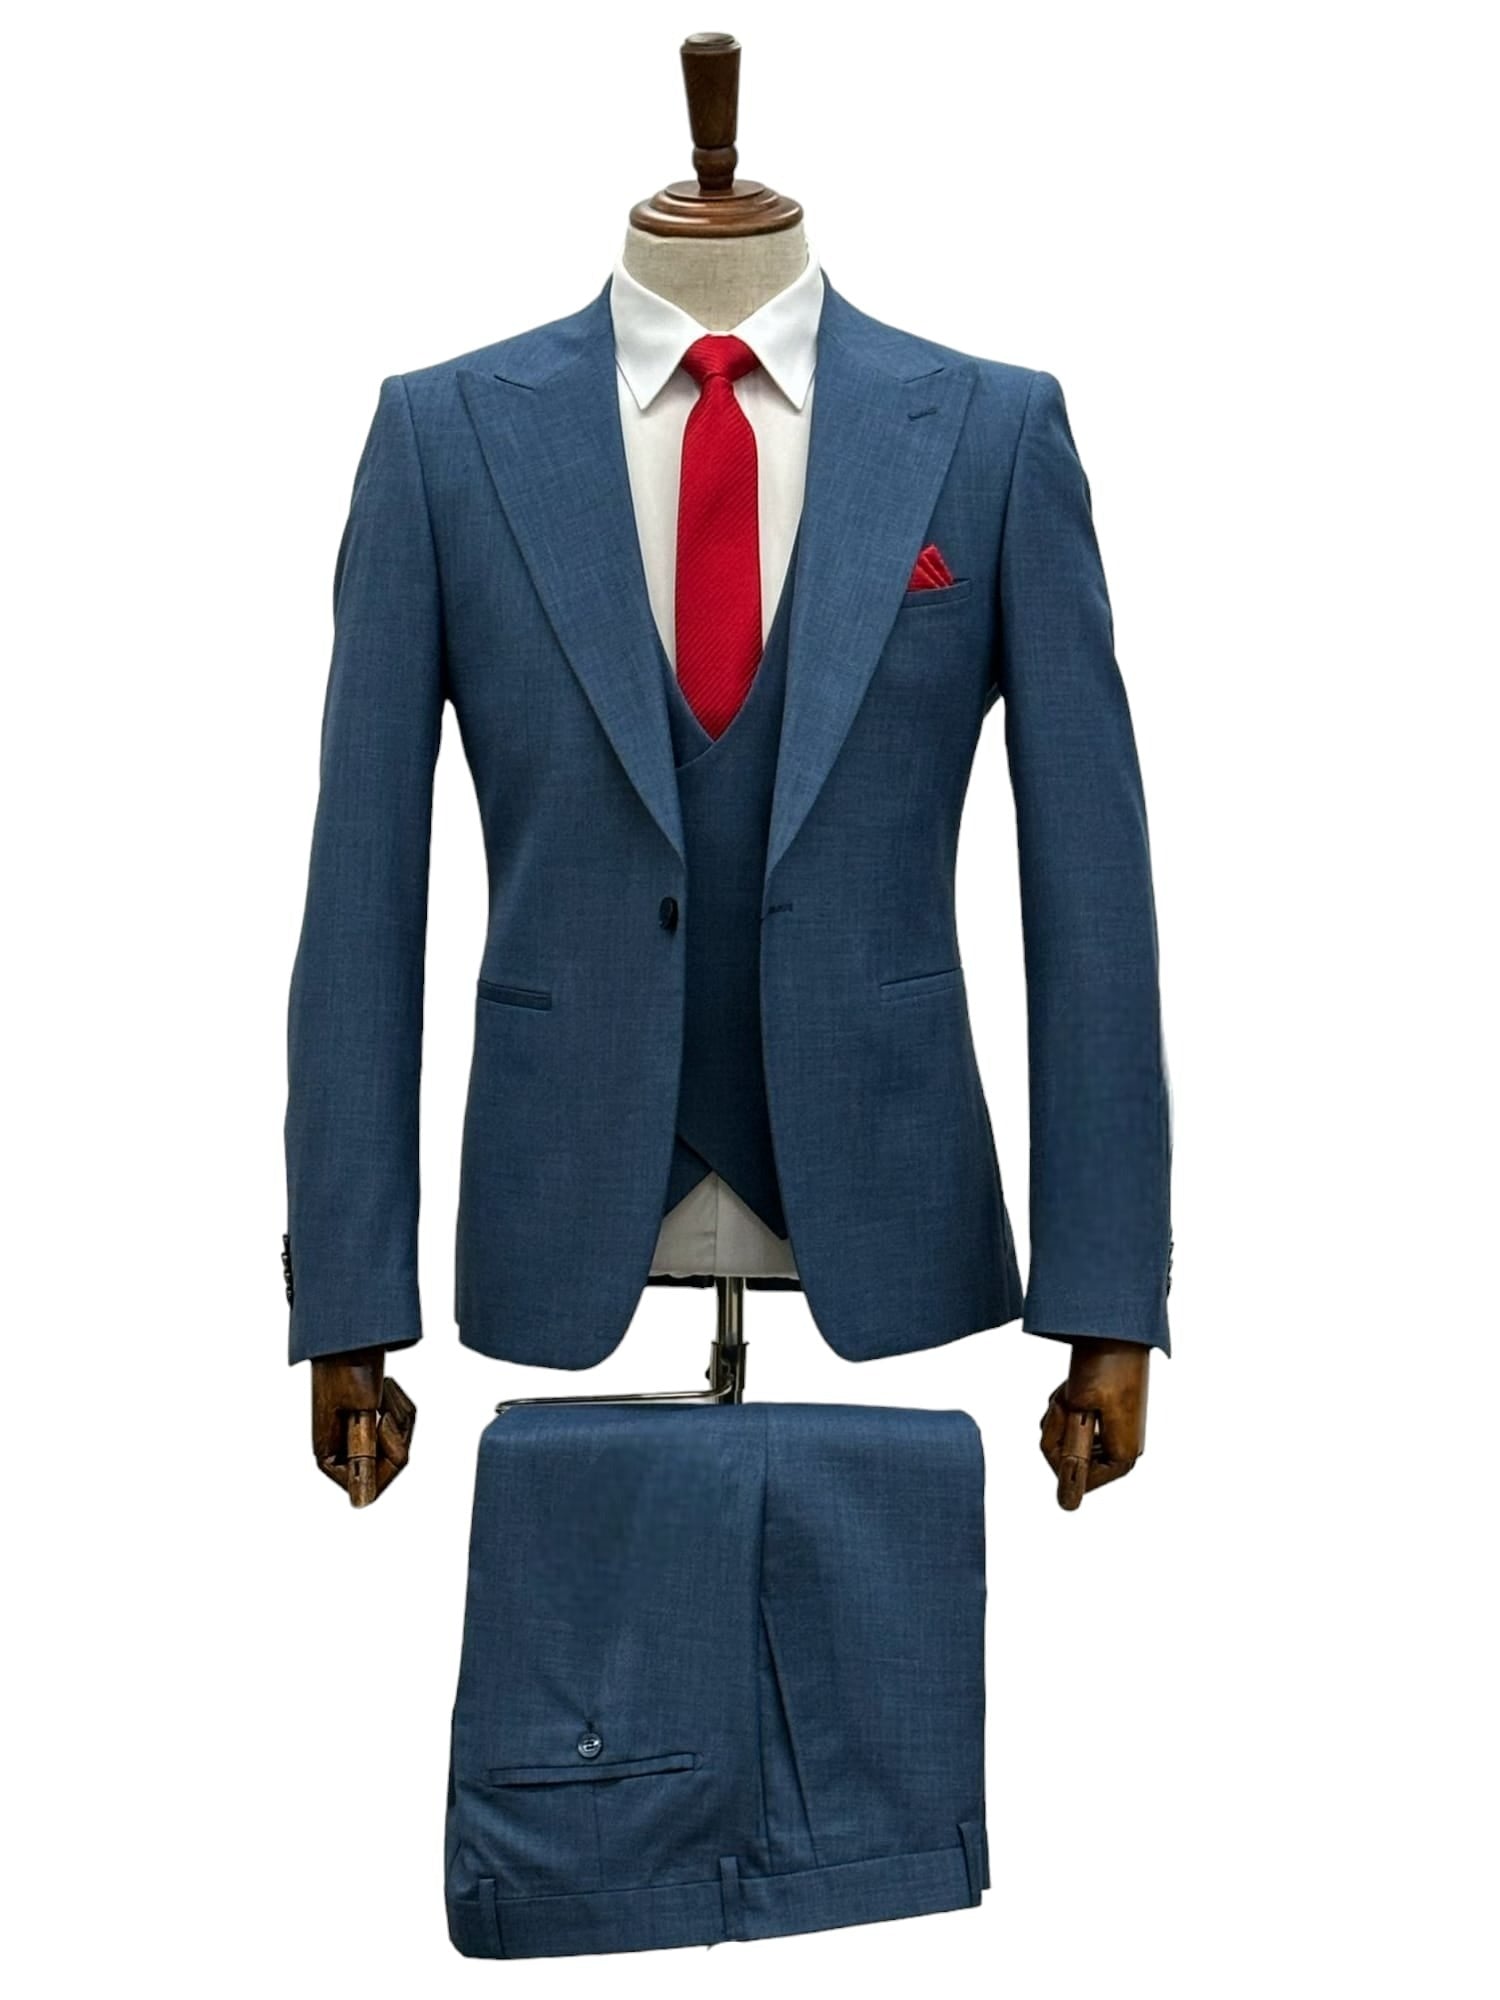 Giovanni Testi Suits With Double Breasted Vest - 3 Piece blue